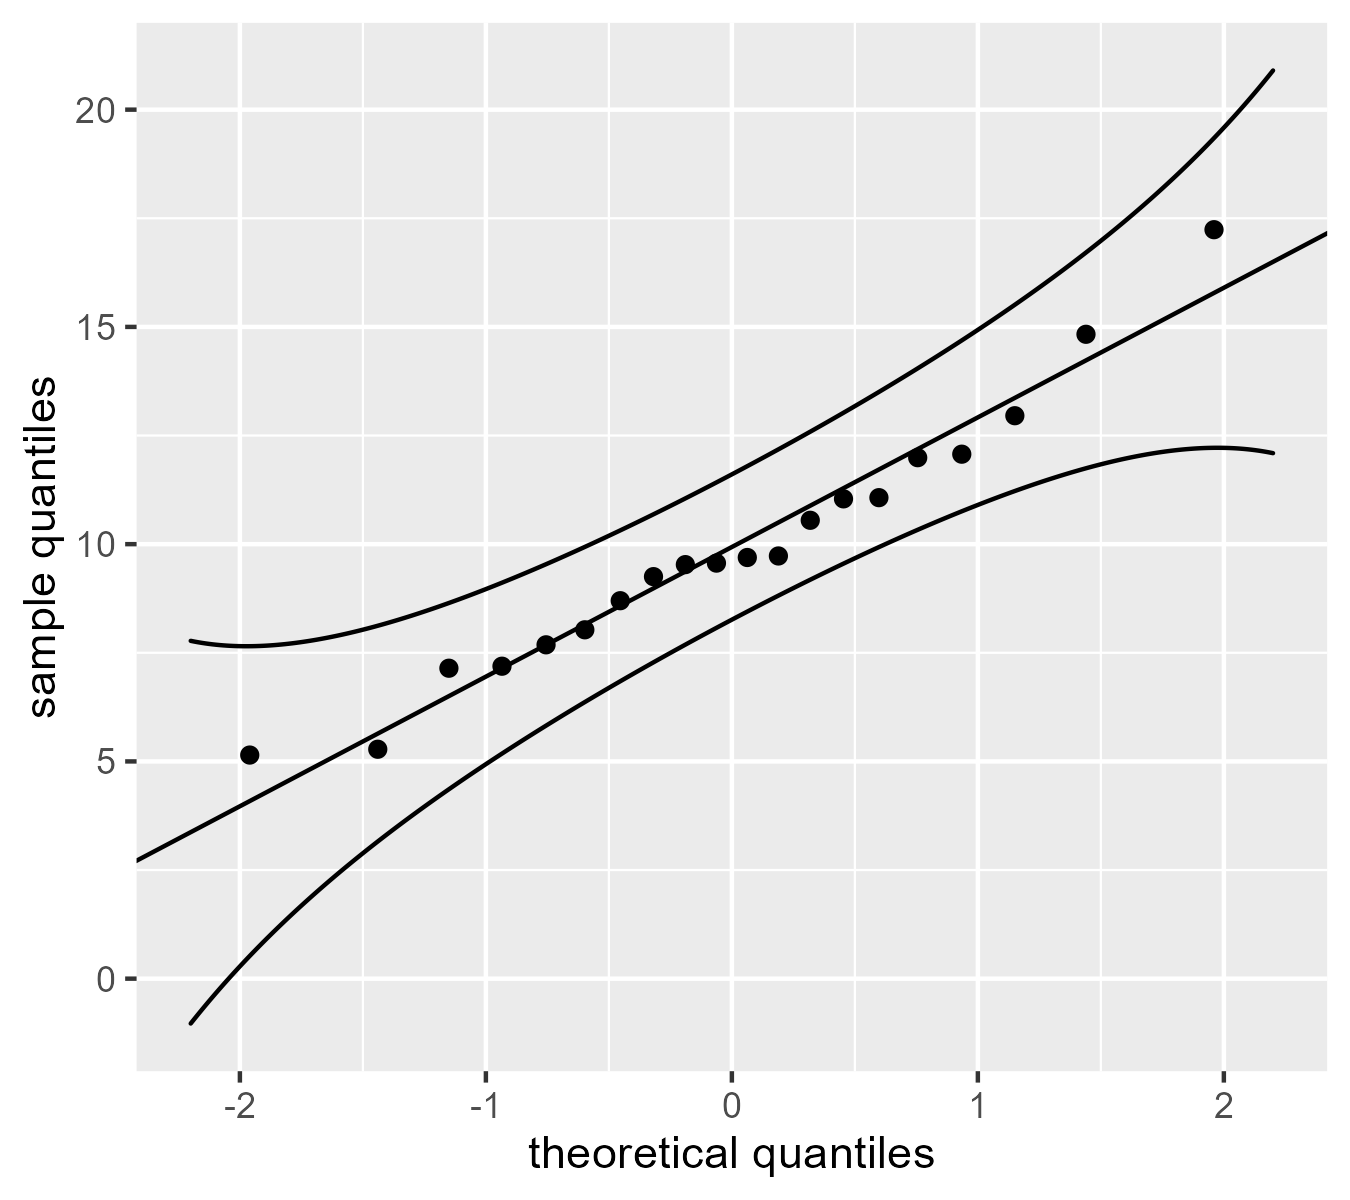 A Q-Q plot with a confidence band.